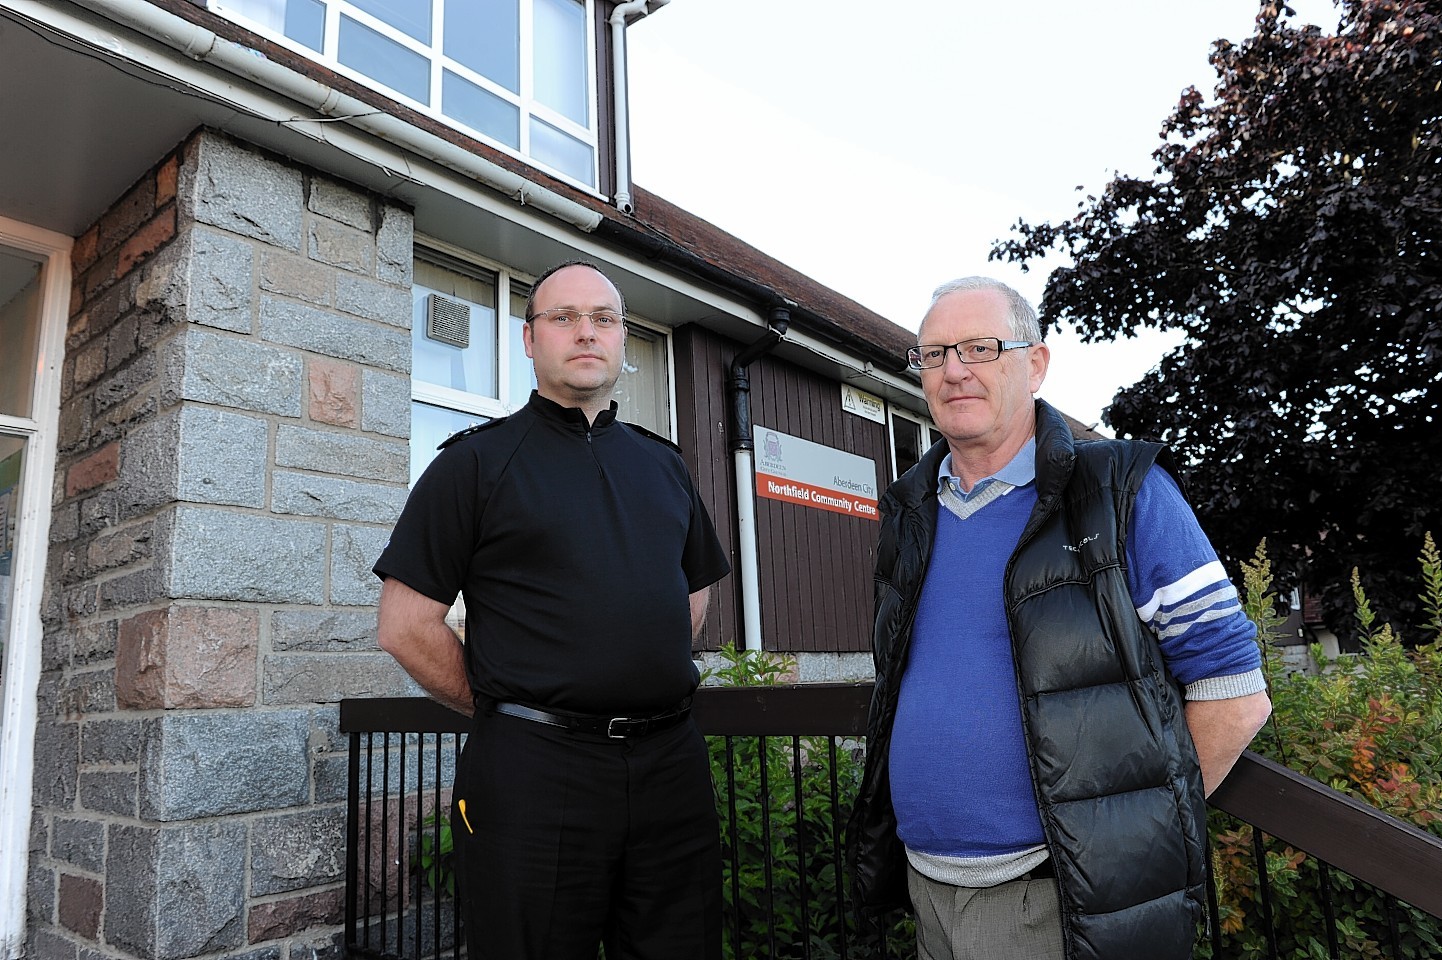 Kevin Wallace and Councillor Gordon Graham at Northfied Community Centre where the meeting was held